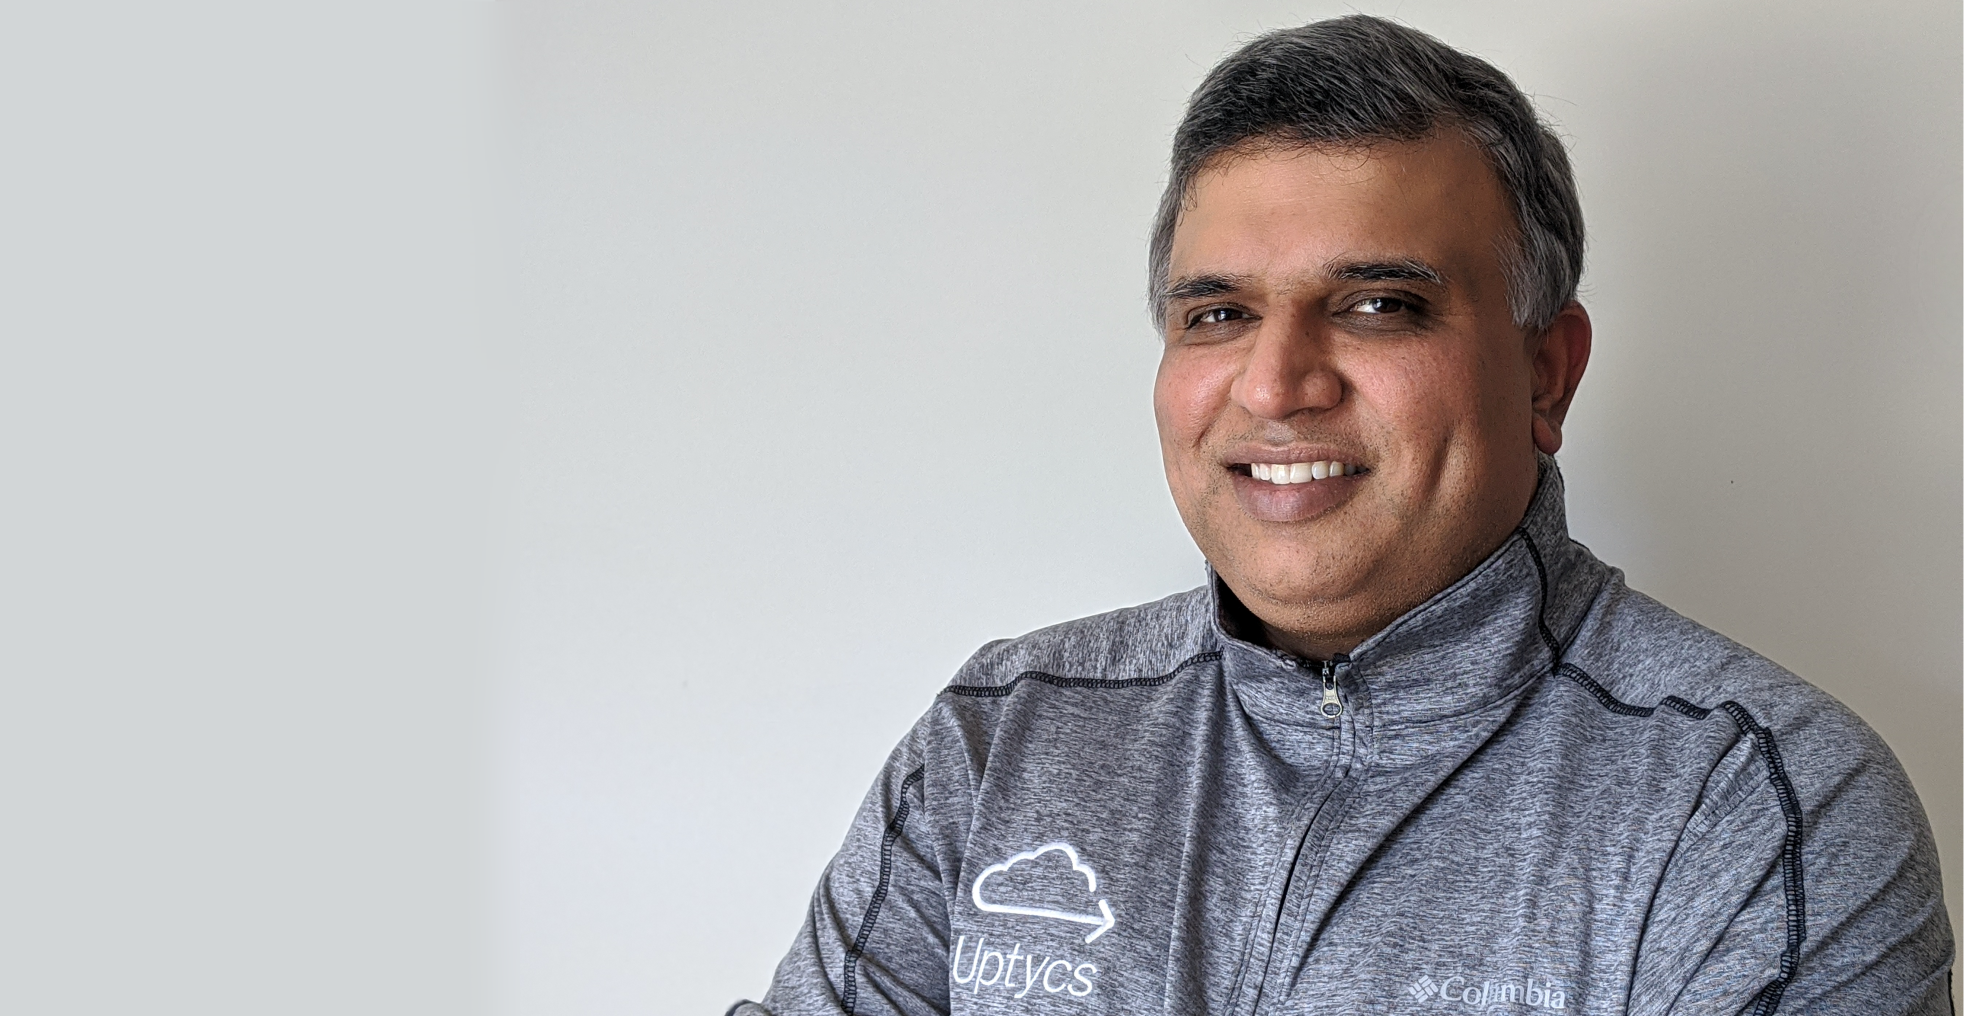 Five Questions with... Ganesh Pai, CEO, Uptycs